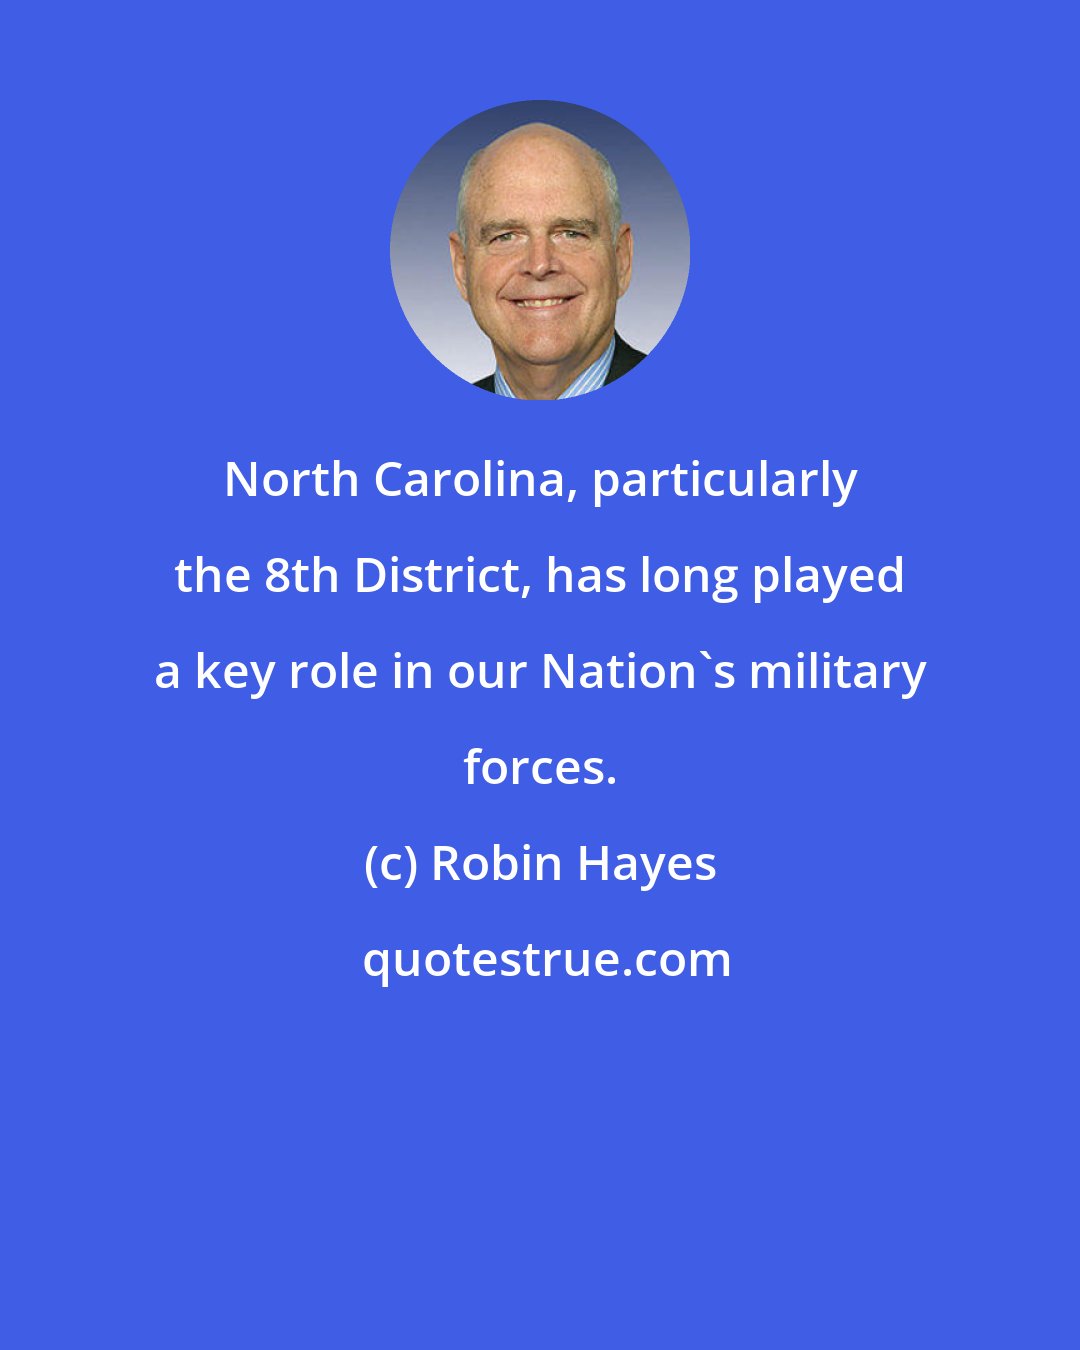 Robin Hayes: North Carolina, particularly the 8th District, has long played a key role in our Nation's military forces.